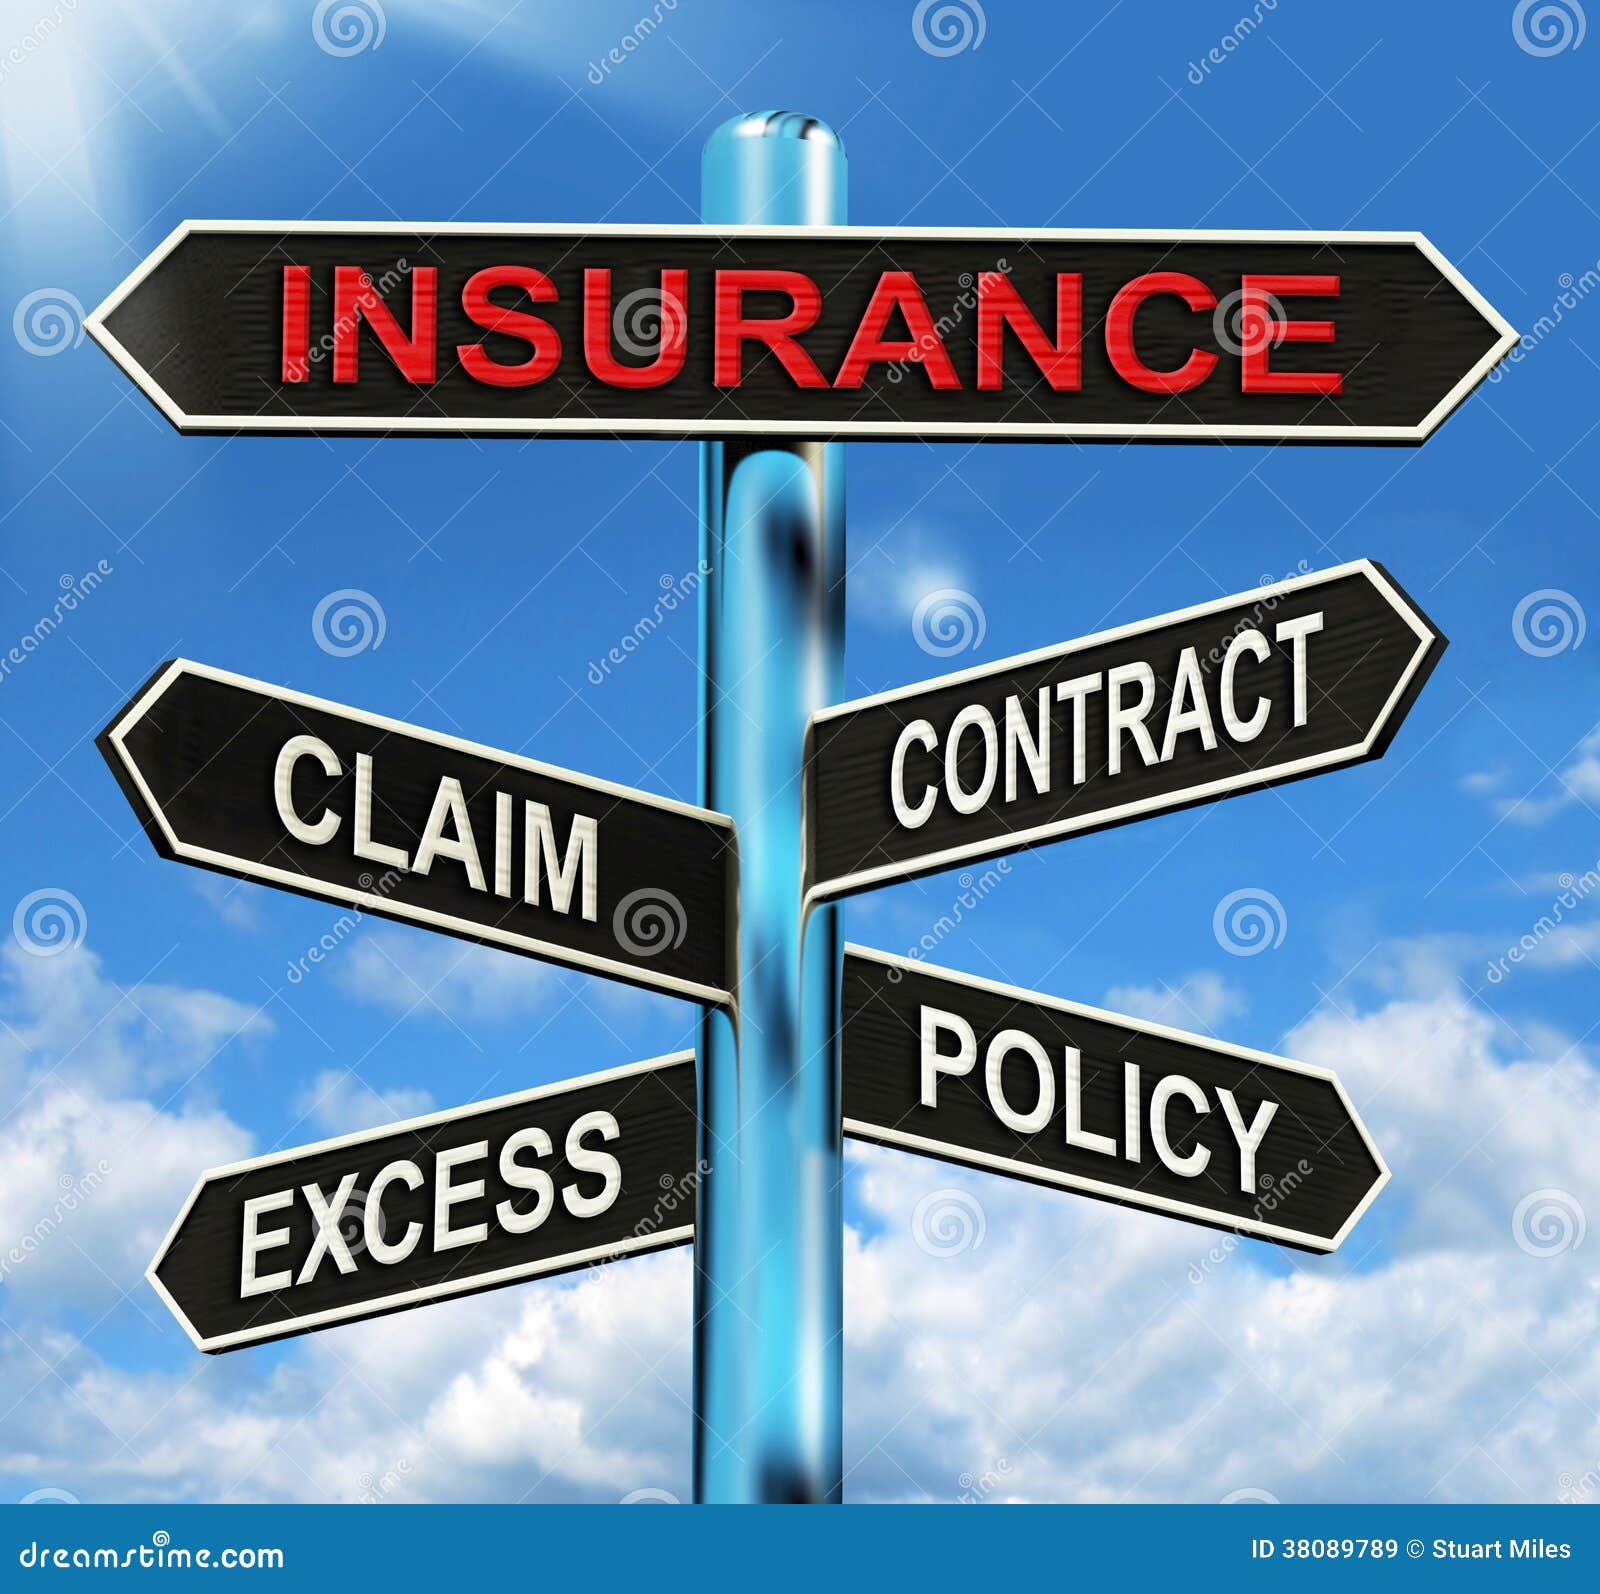 Insurance Signpost Meaning Claim Excess Contract And Policy.